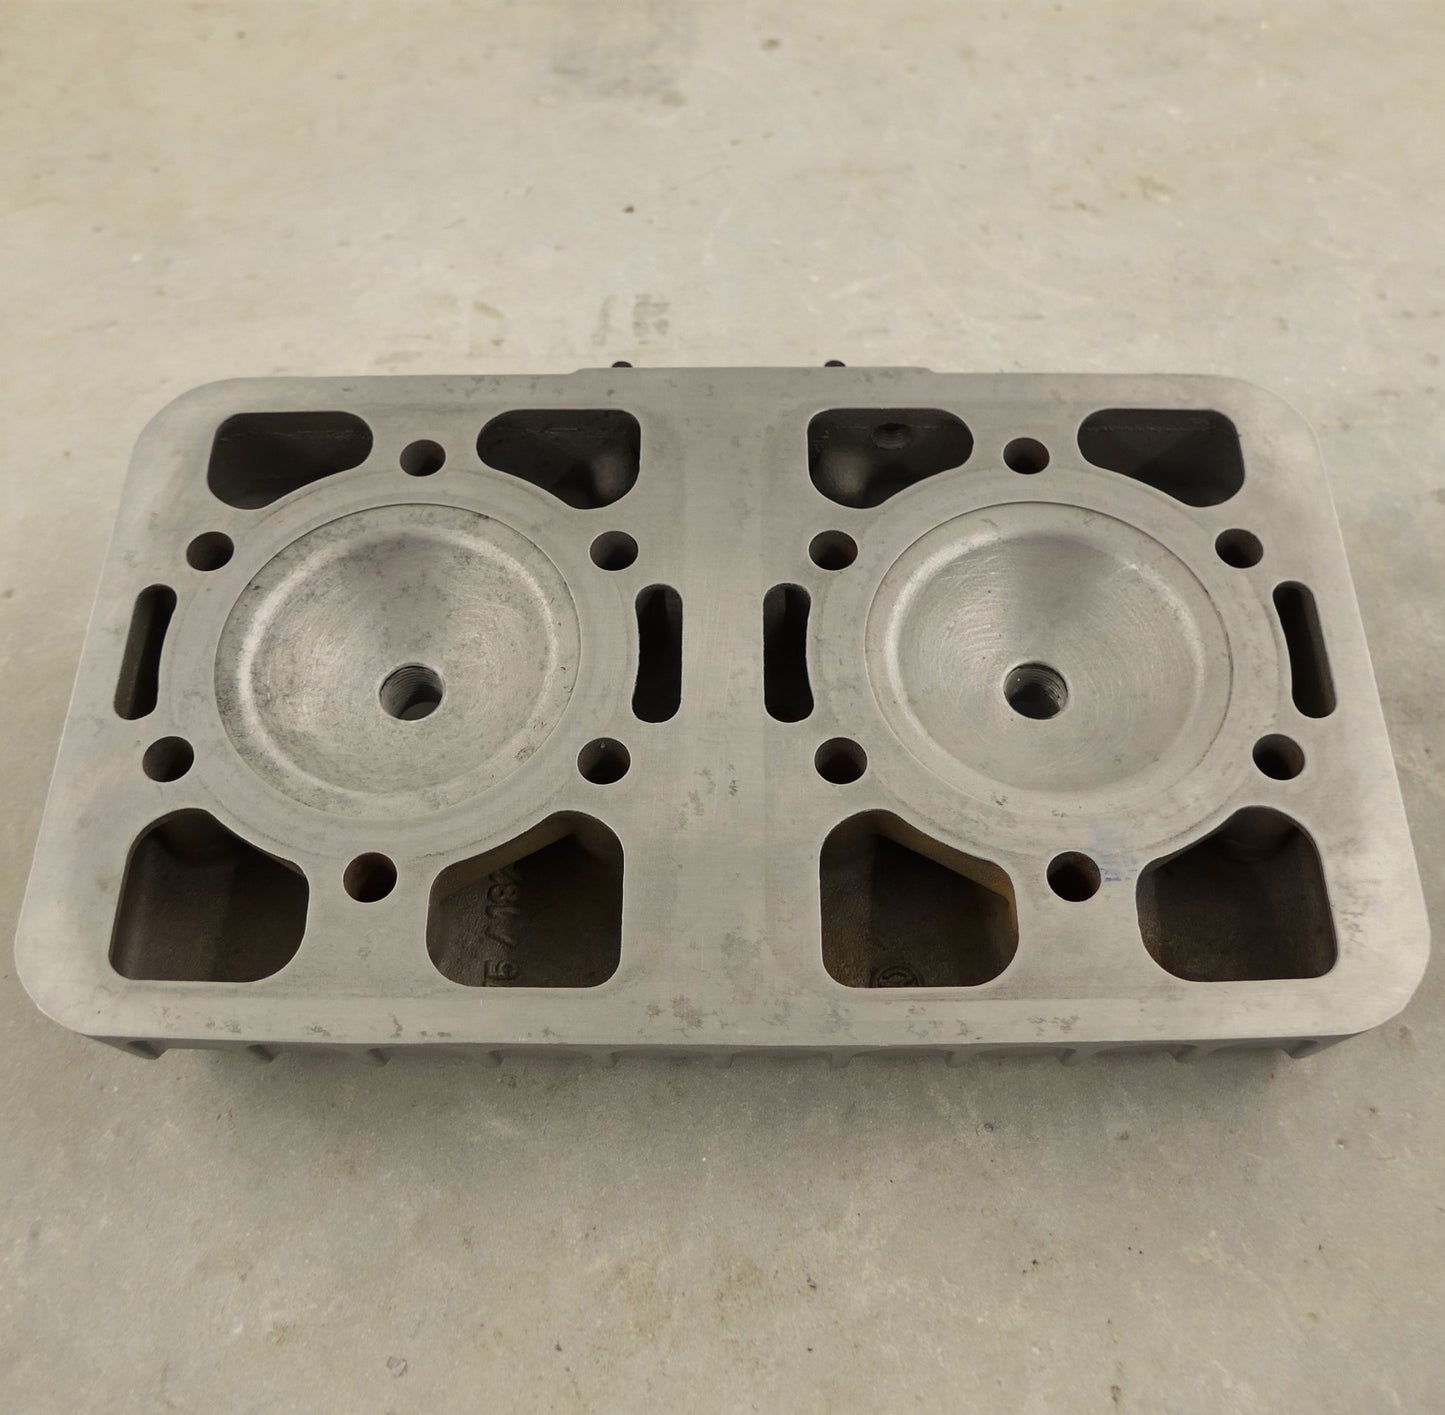 Rotax 532 Reconditioned Cylinder Head -Single Ignition (A/R)